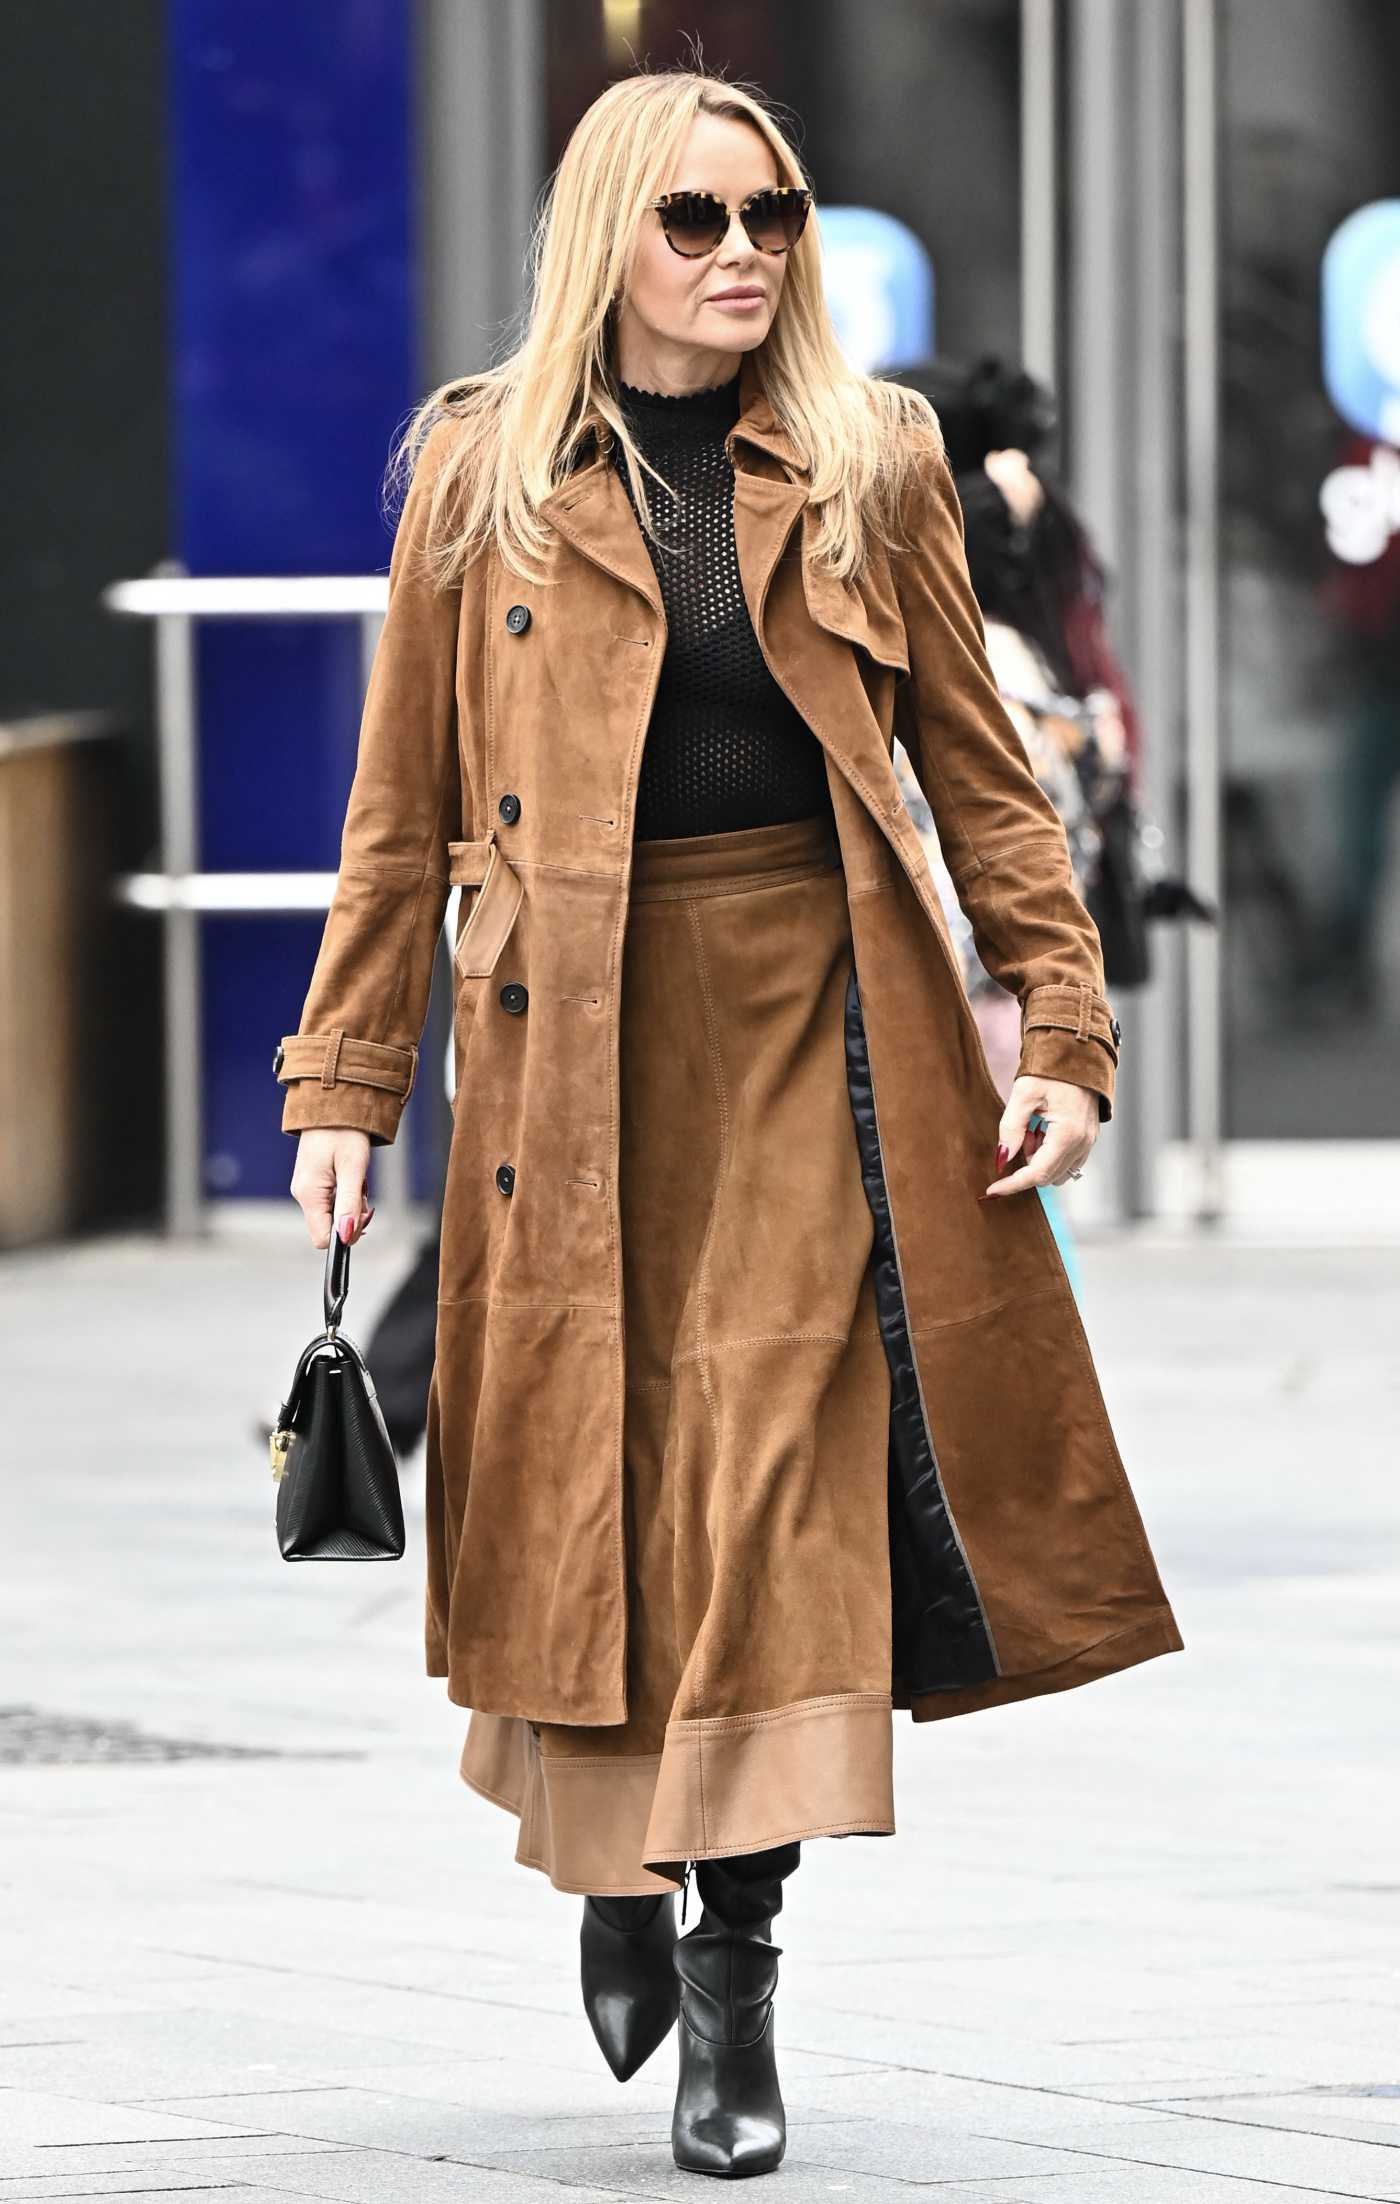 Amanda Holden in a Tan Leather Trench Coat Leaves the Global Studios Heart Breakfast Show in London 02/20/2024